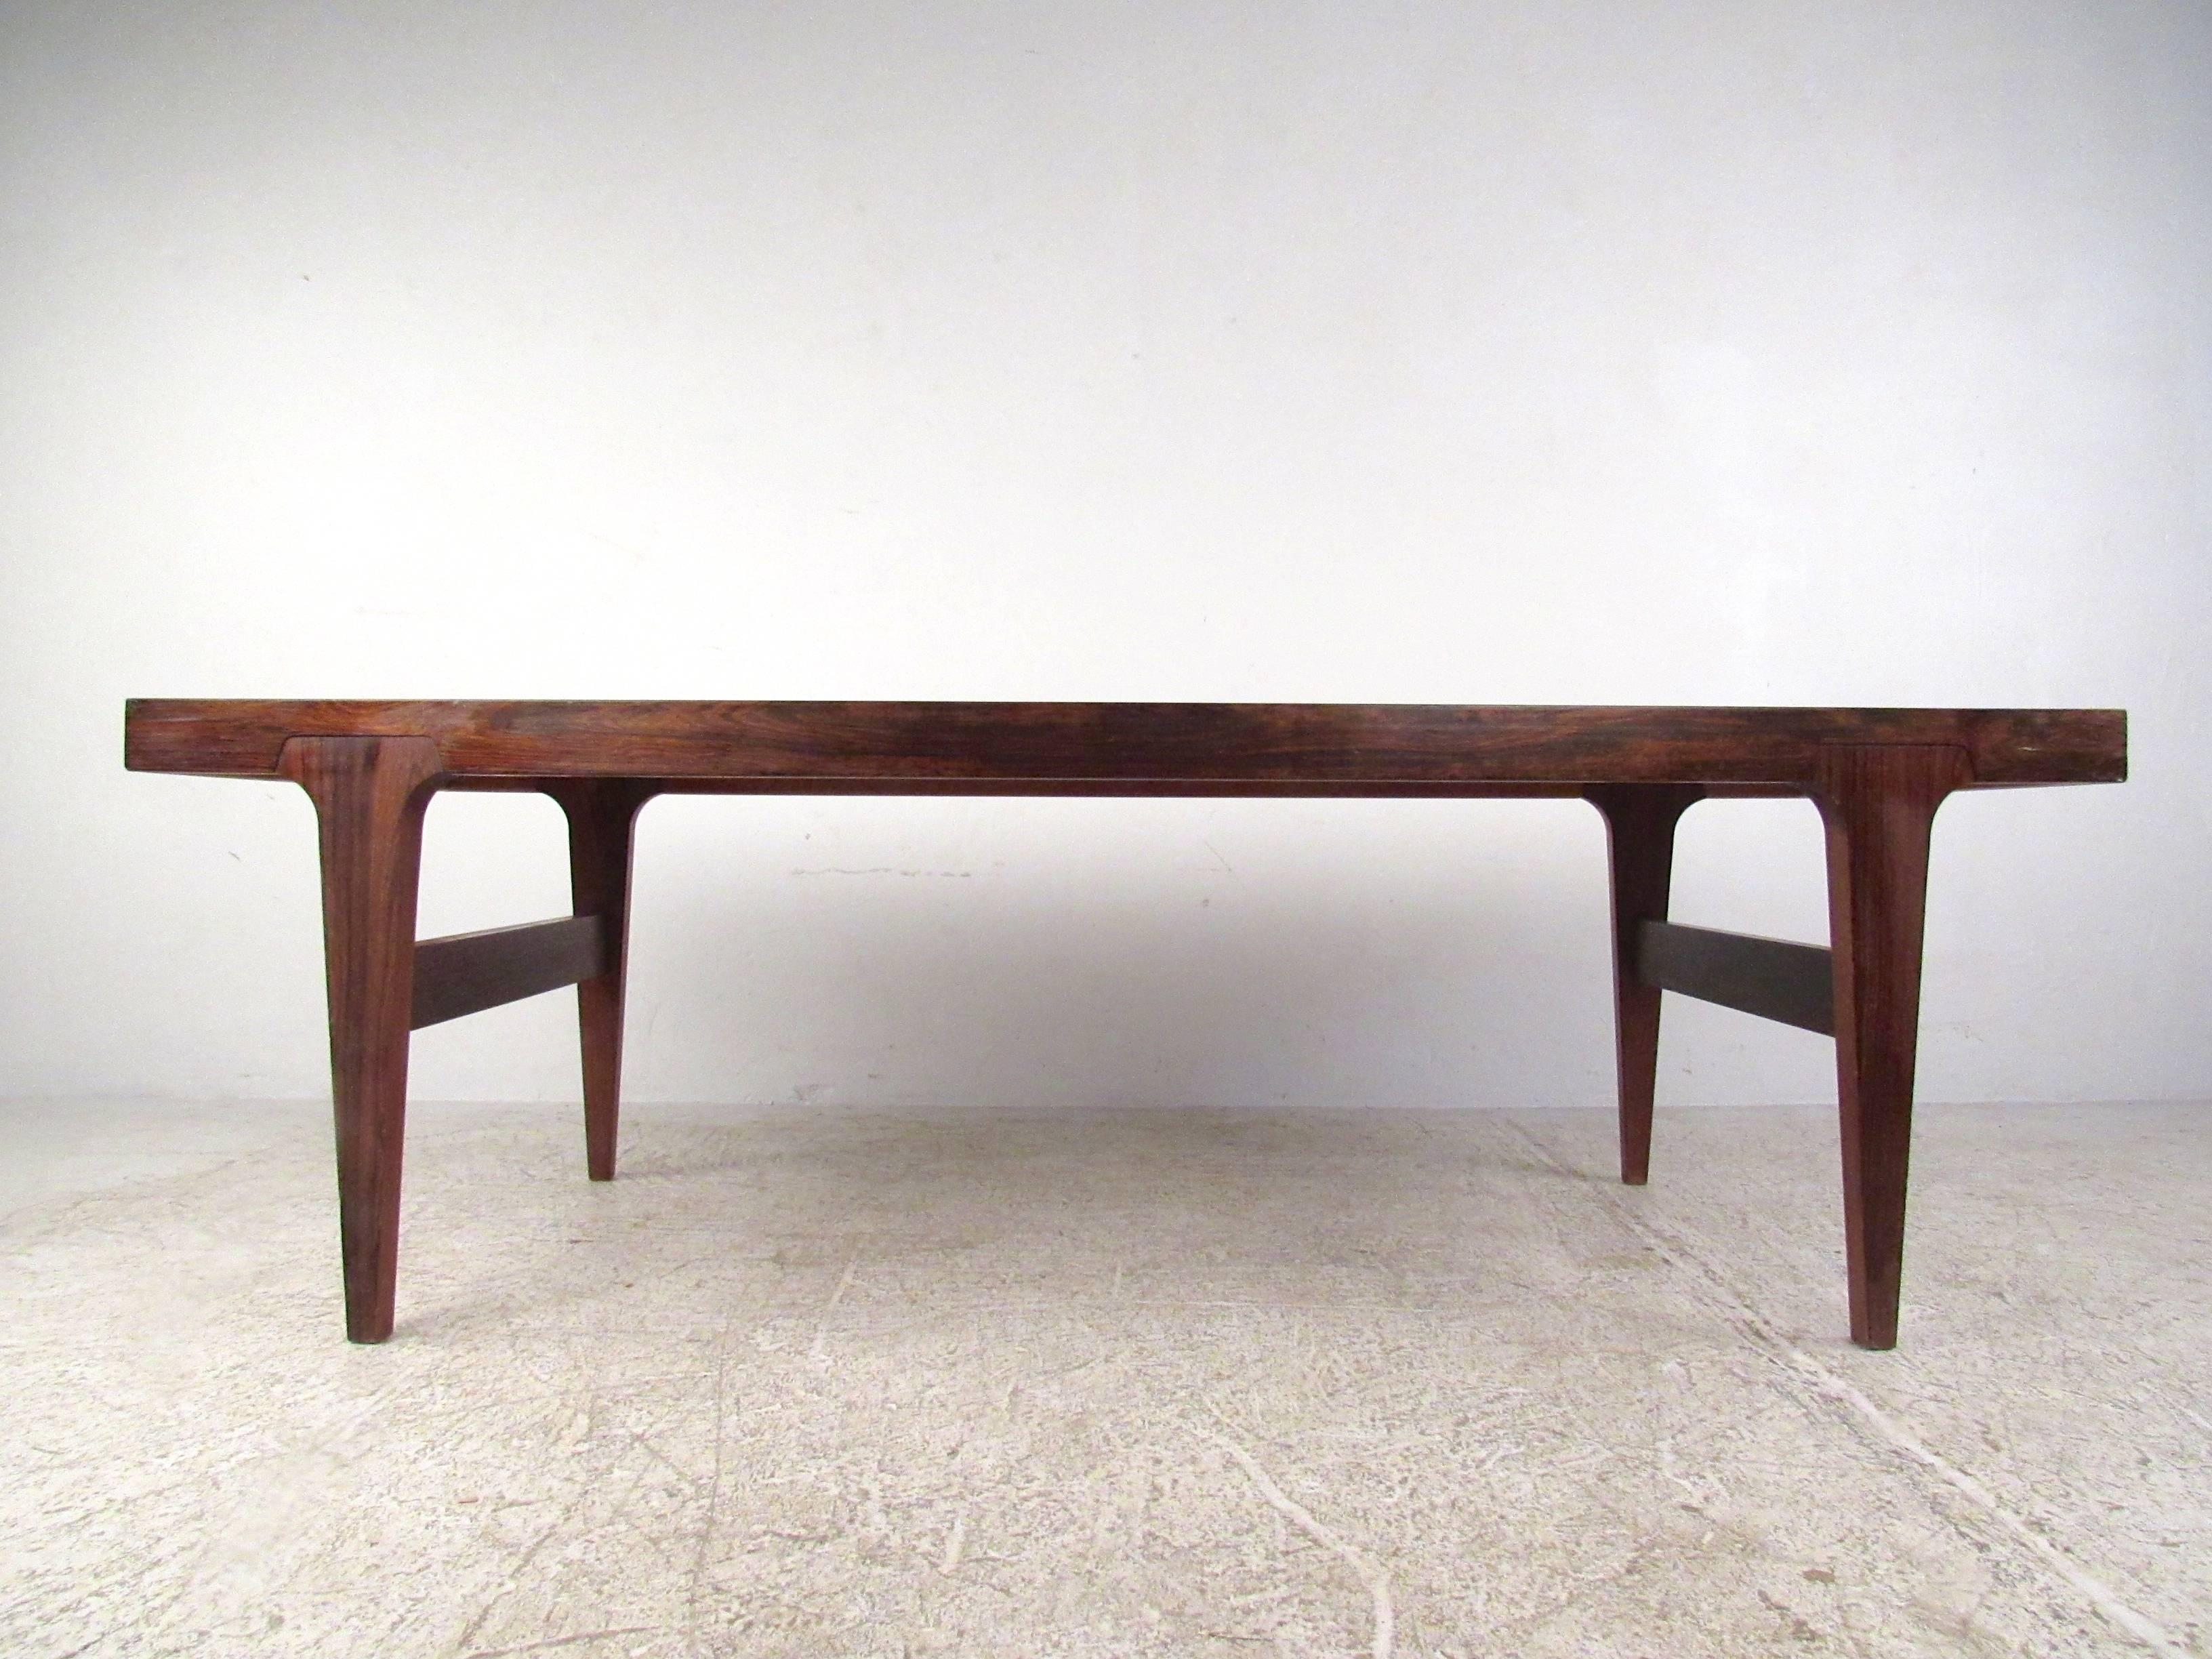 This beautiful mid-century Danish rosewood coffee table features unique tapered legs with wide slat stretchers for added support. The thick Mid-Century rosewood tabletop has a wonderful vintage finish and makes a unique addition to any interior.